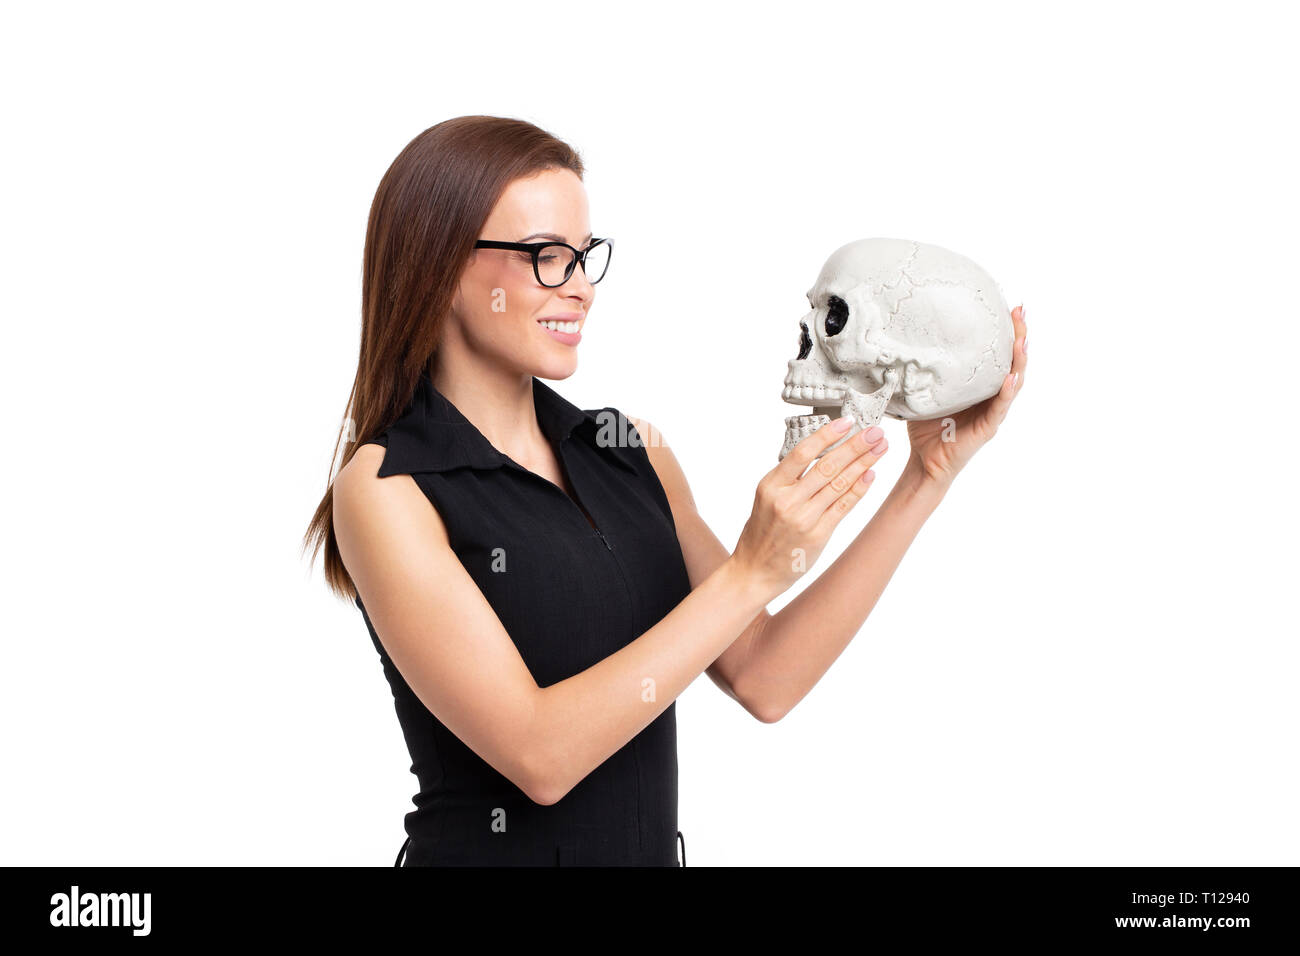 Young caucasian woman smiling on skull, isolated on white background Stock Photo